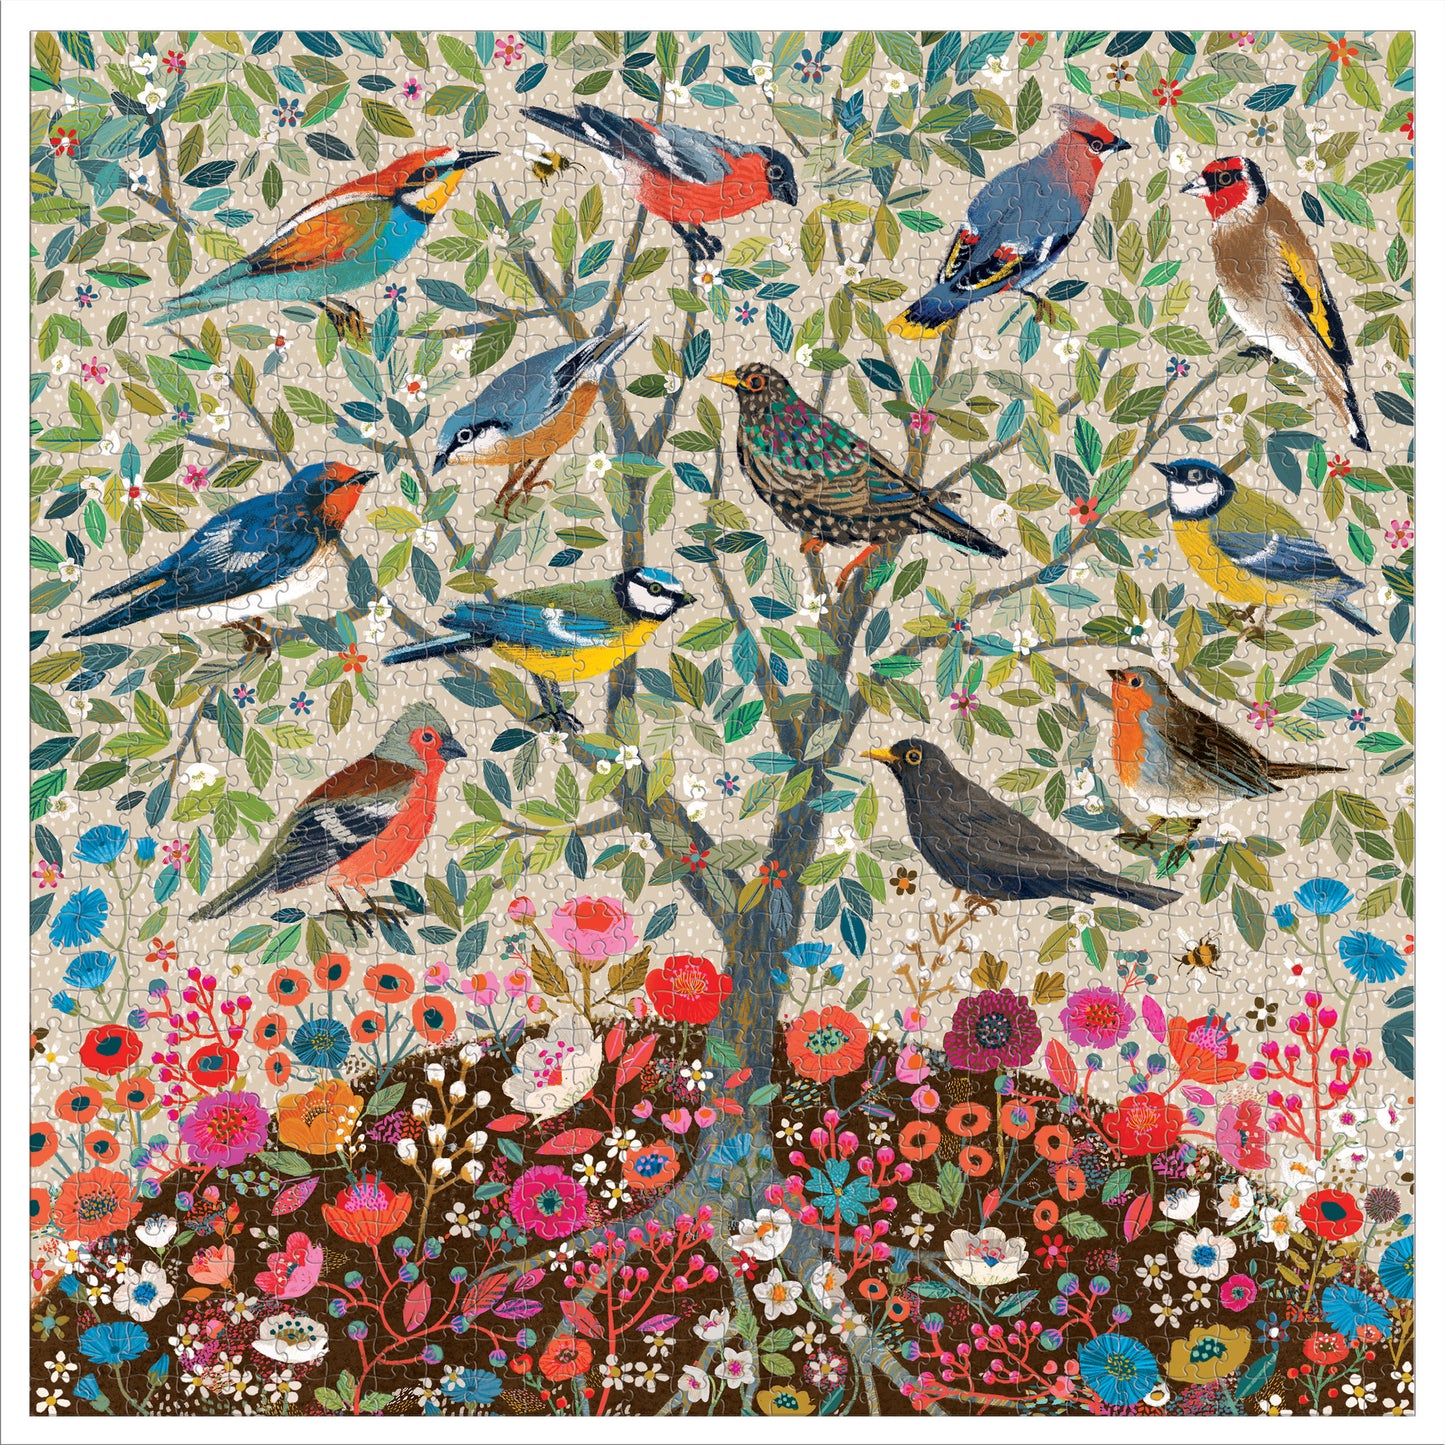 Songbirds Tree 1000 Piece Jigsaw Puzzle | eeBoo Piece & Love|Gifts for Bird Watchers | Adult Puzzle